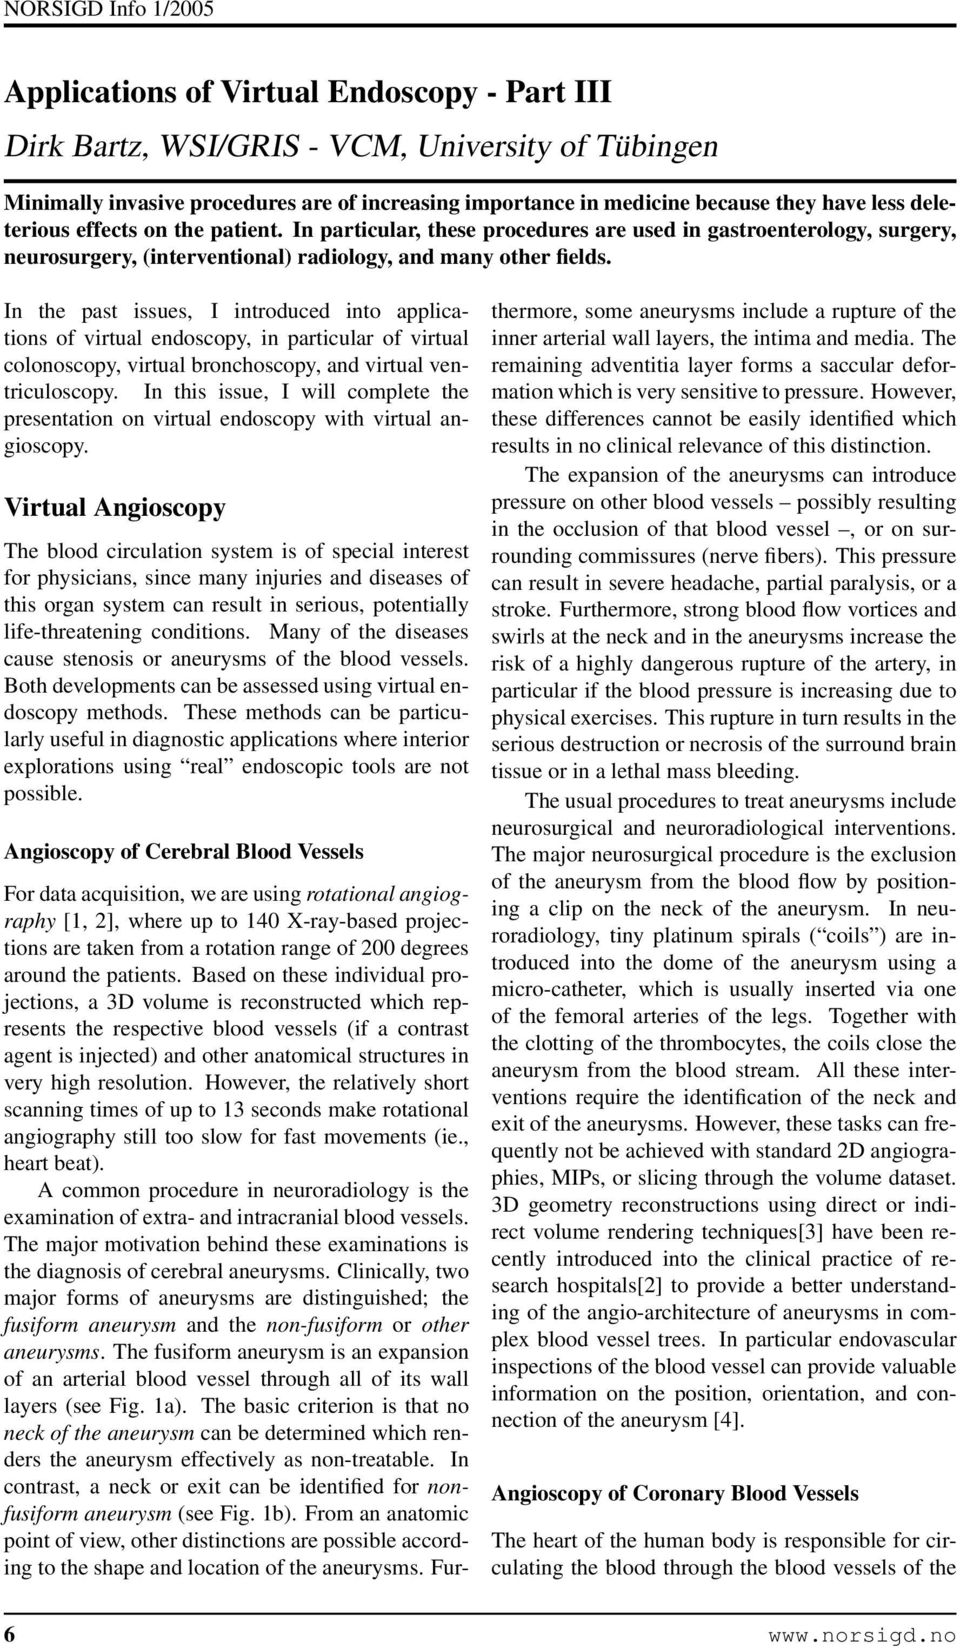 In the past issues, I introduced into applications of virtual endoscopy, in particular of virtual colonoscopy, virtual bronchoscopy, and virtual ventriculoscopy.